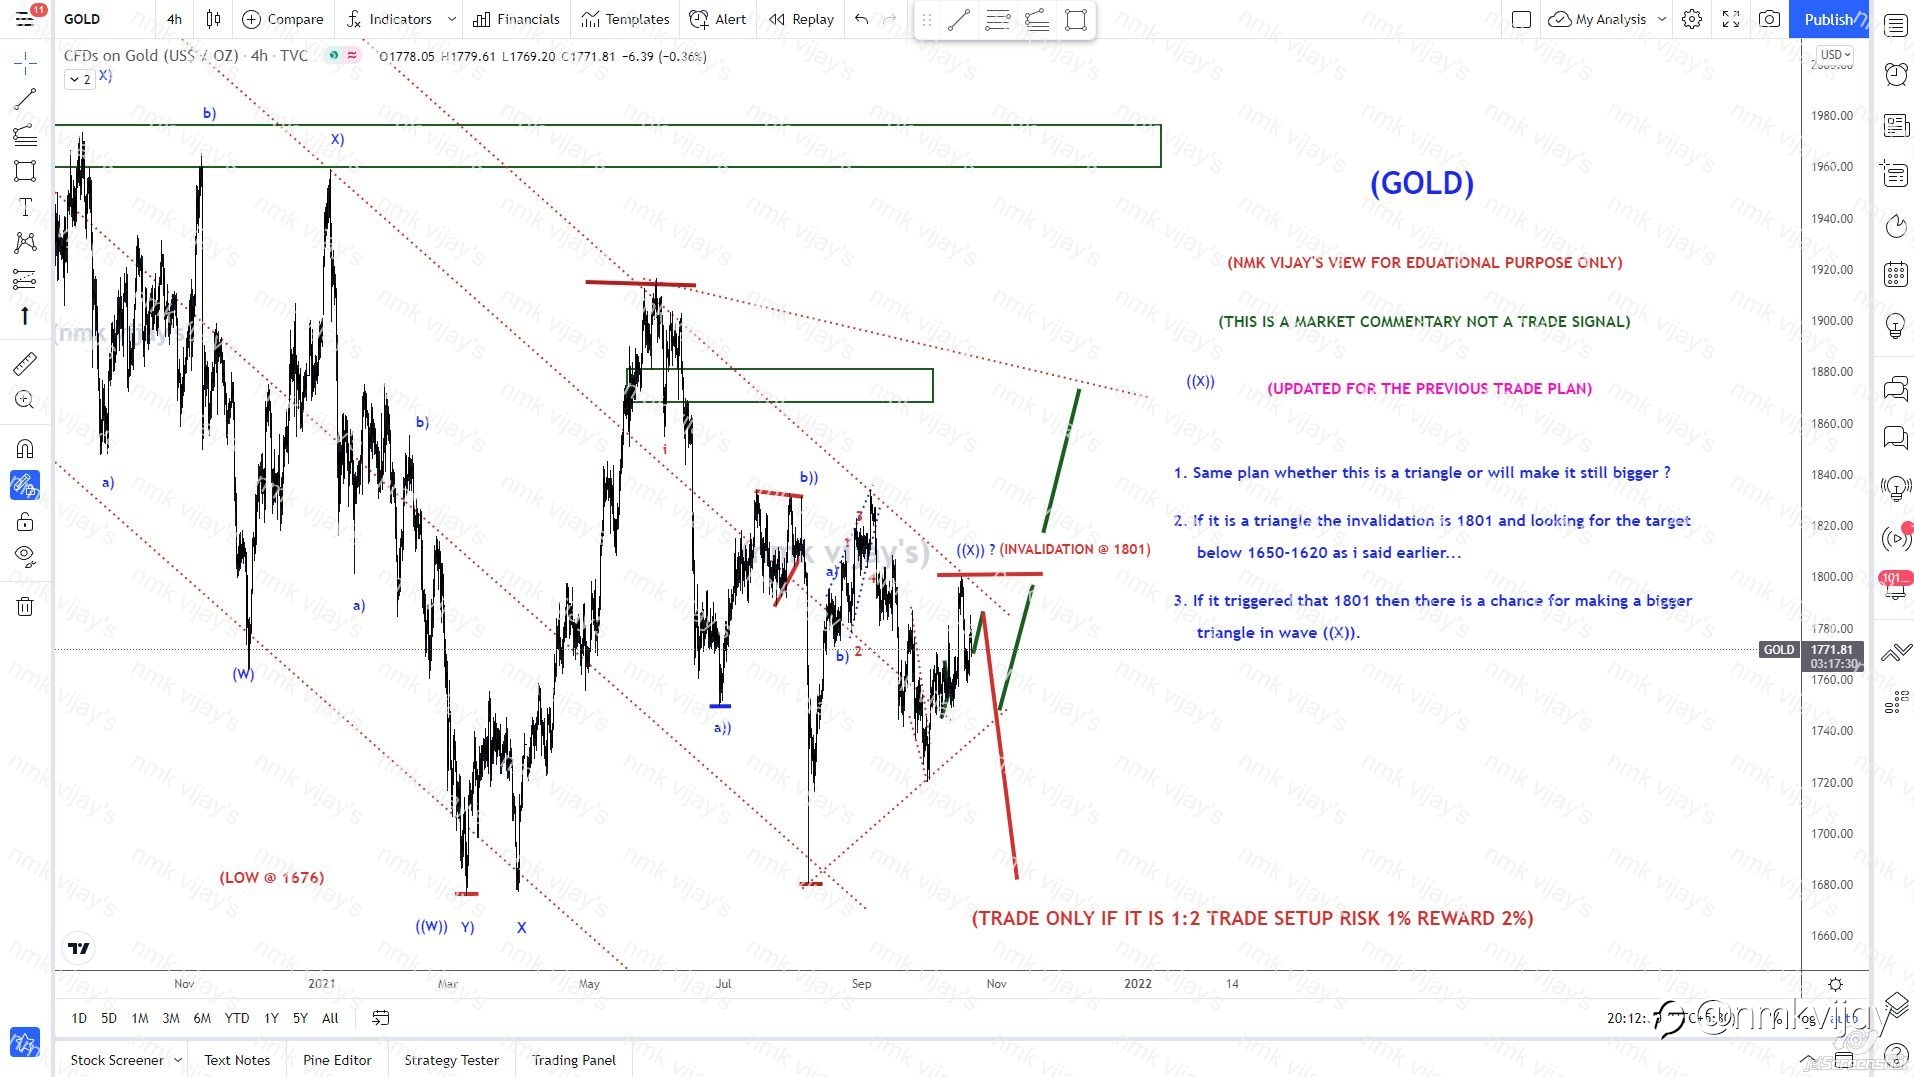 GOLD-Still we are in that TRIANGLE ((X)) or will make bigger?